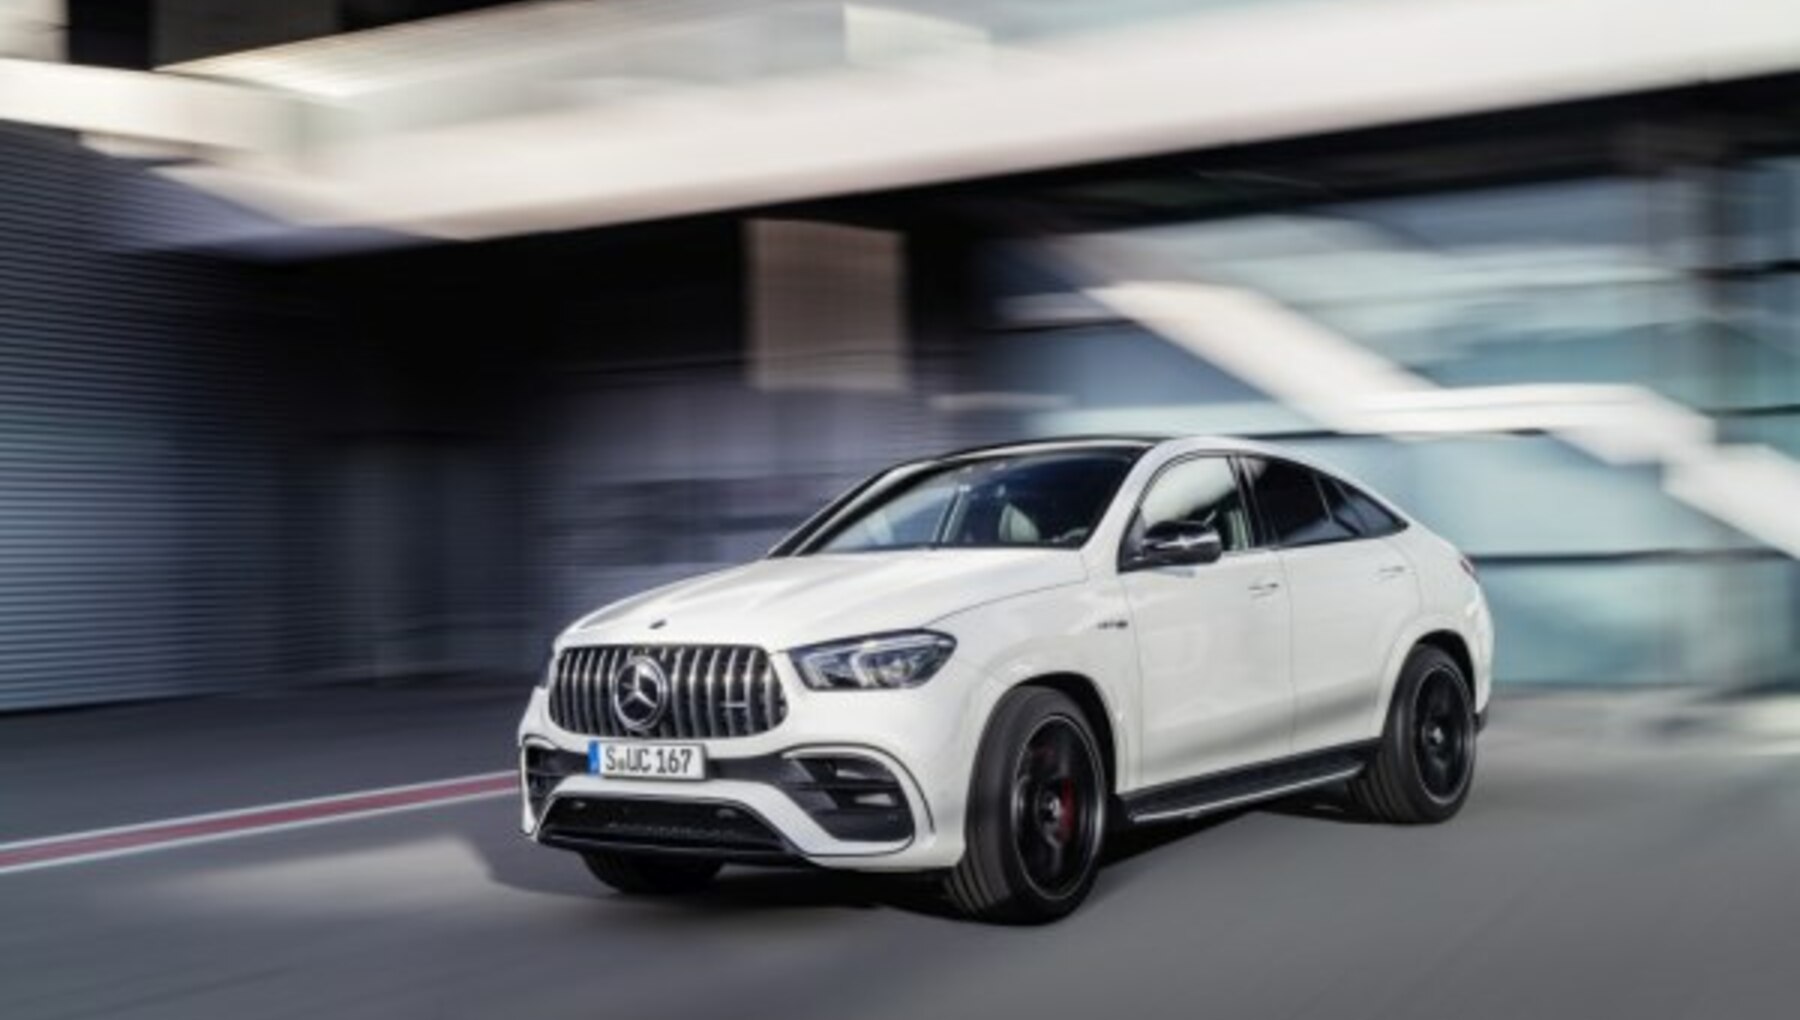 Mercedes-Benz GLE Coupe (C167) GLE 400 d (330 Hp) 4MATIC 9G-TRONIC 2020, 2021, 2022 